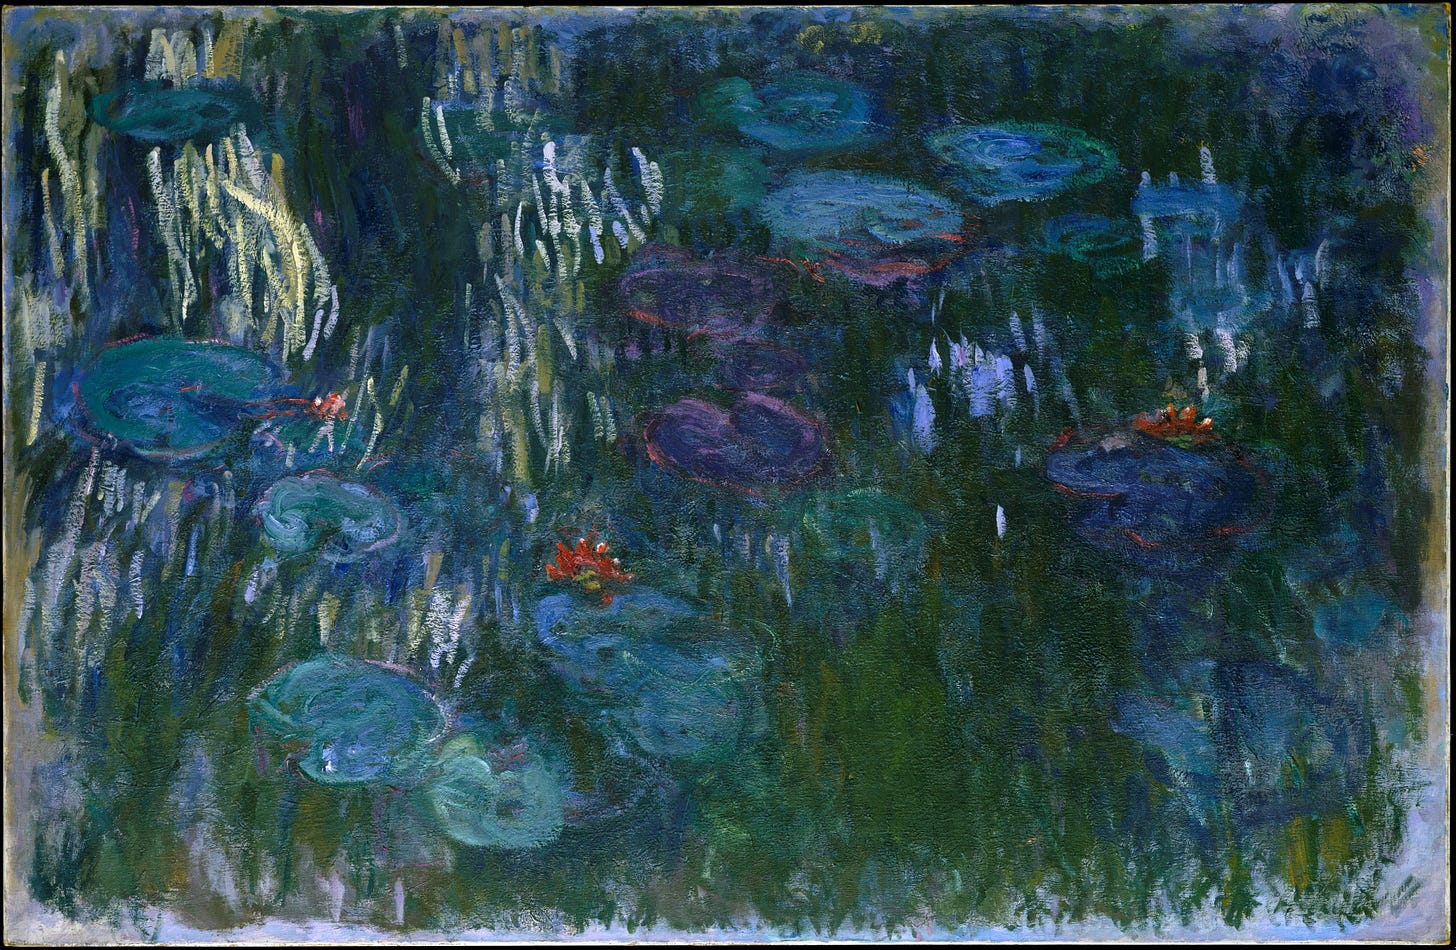 a painting of water lilies floating on the dark surface of water with the reflection of bright willow branches on the left